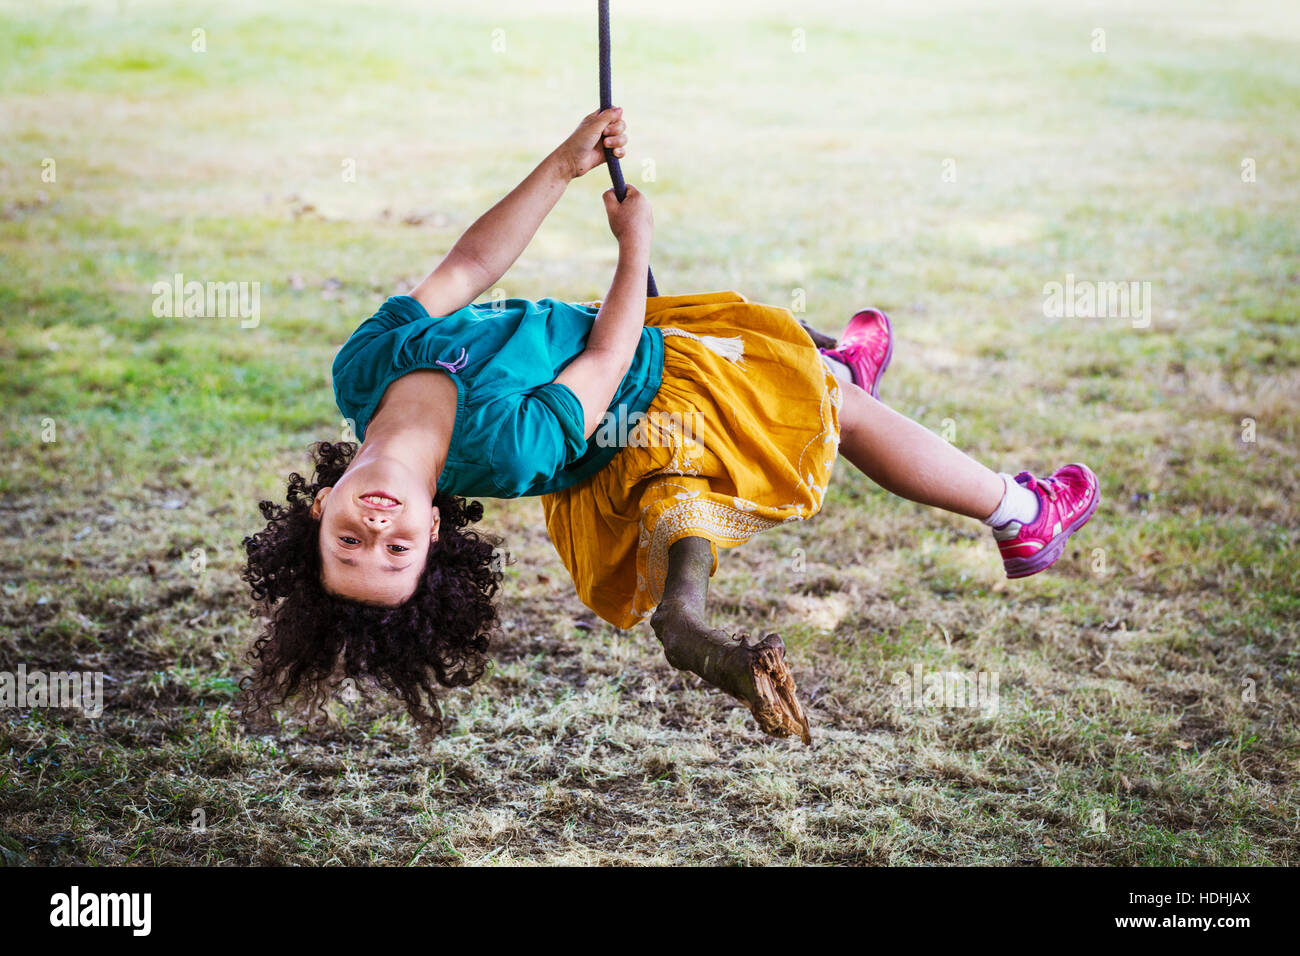 Girl sitting on a tree swing, upside down, smiling at camera. Stock Photo